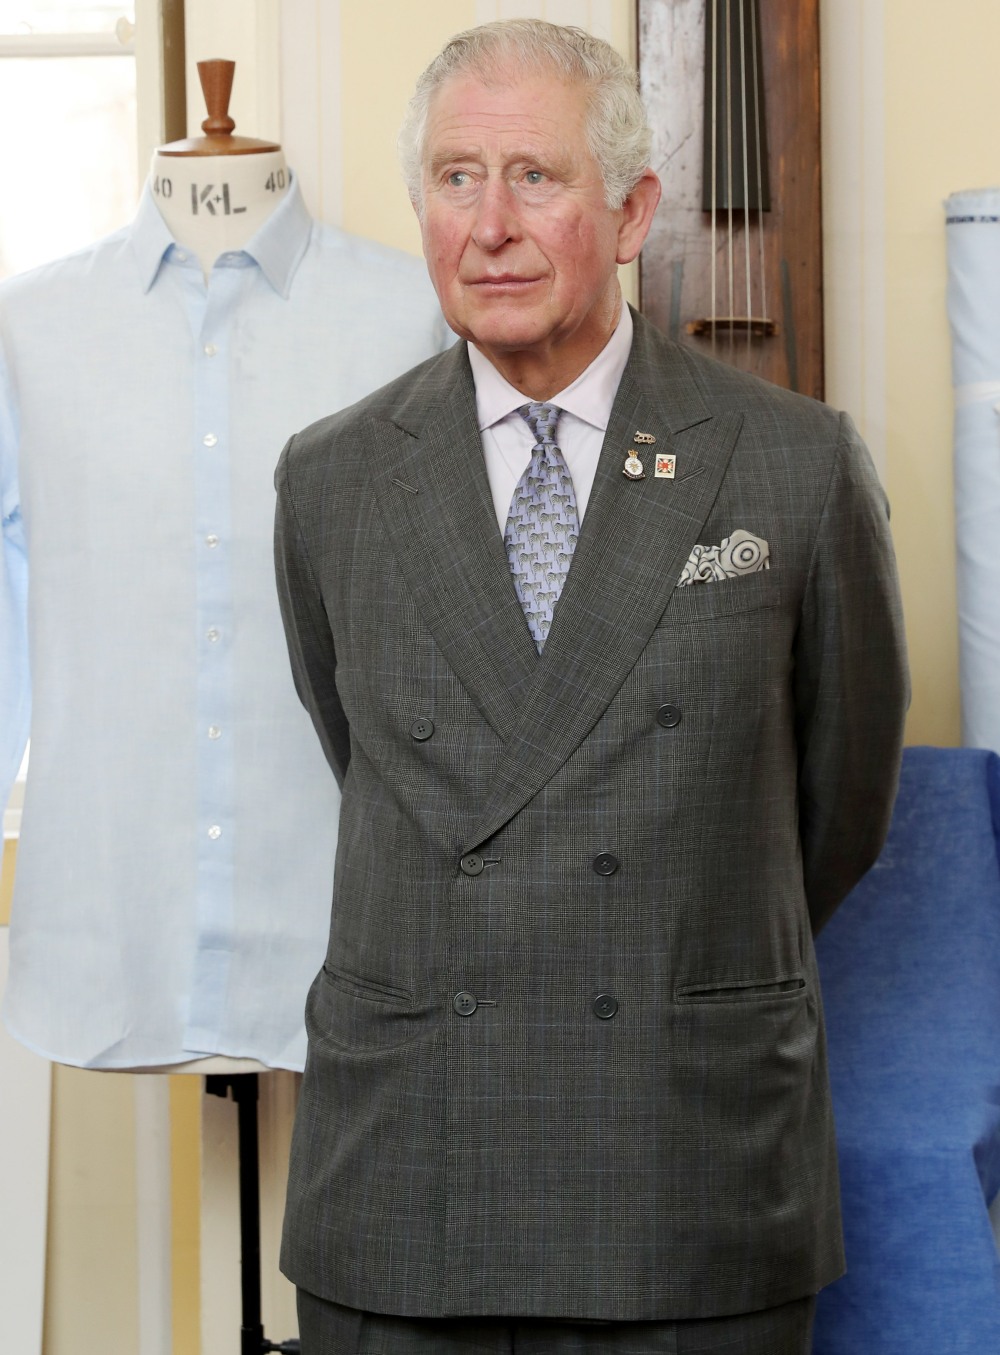 The Prince of Wales Visits Emma Willis LTD In Gloucestershire